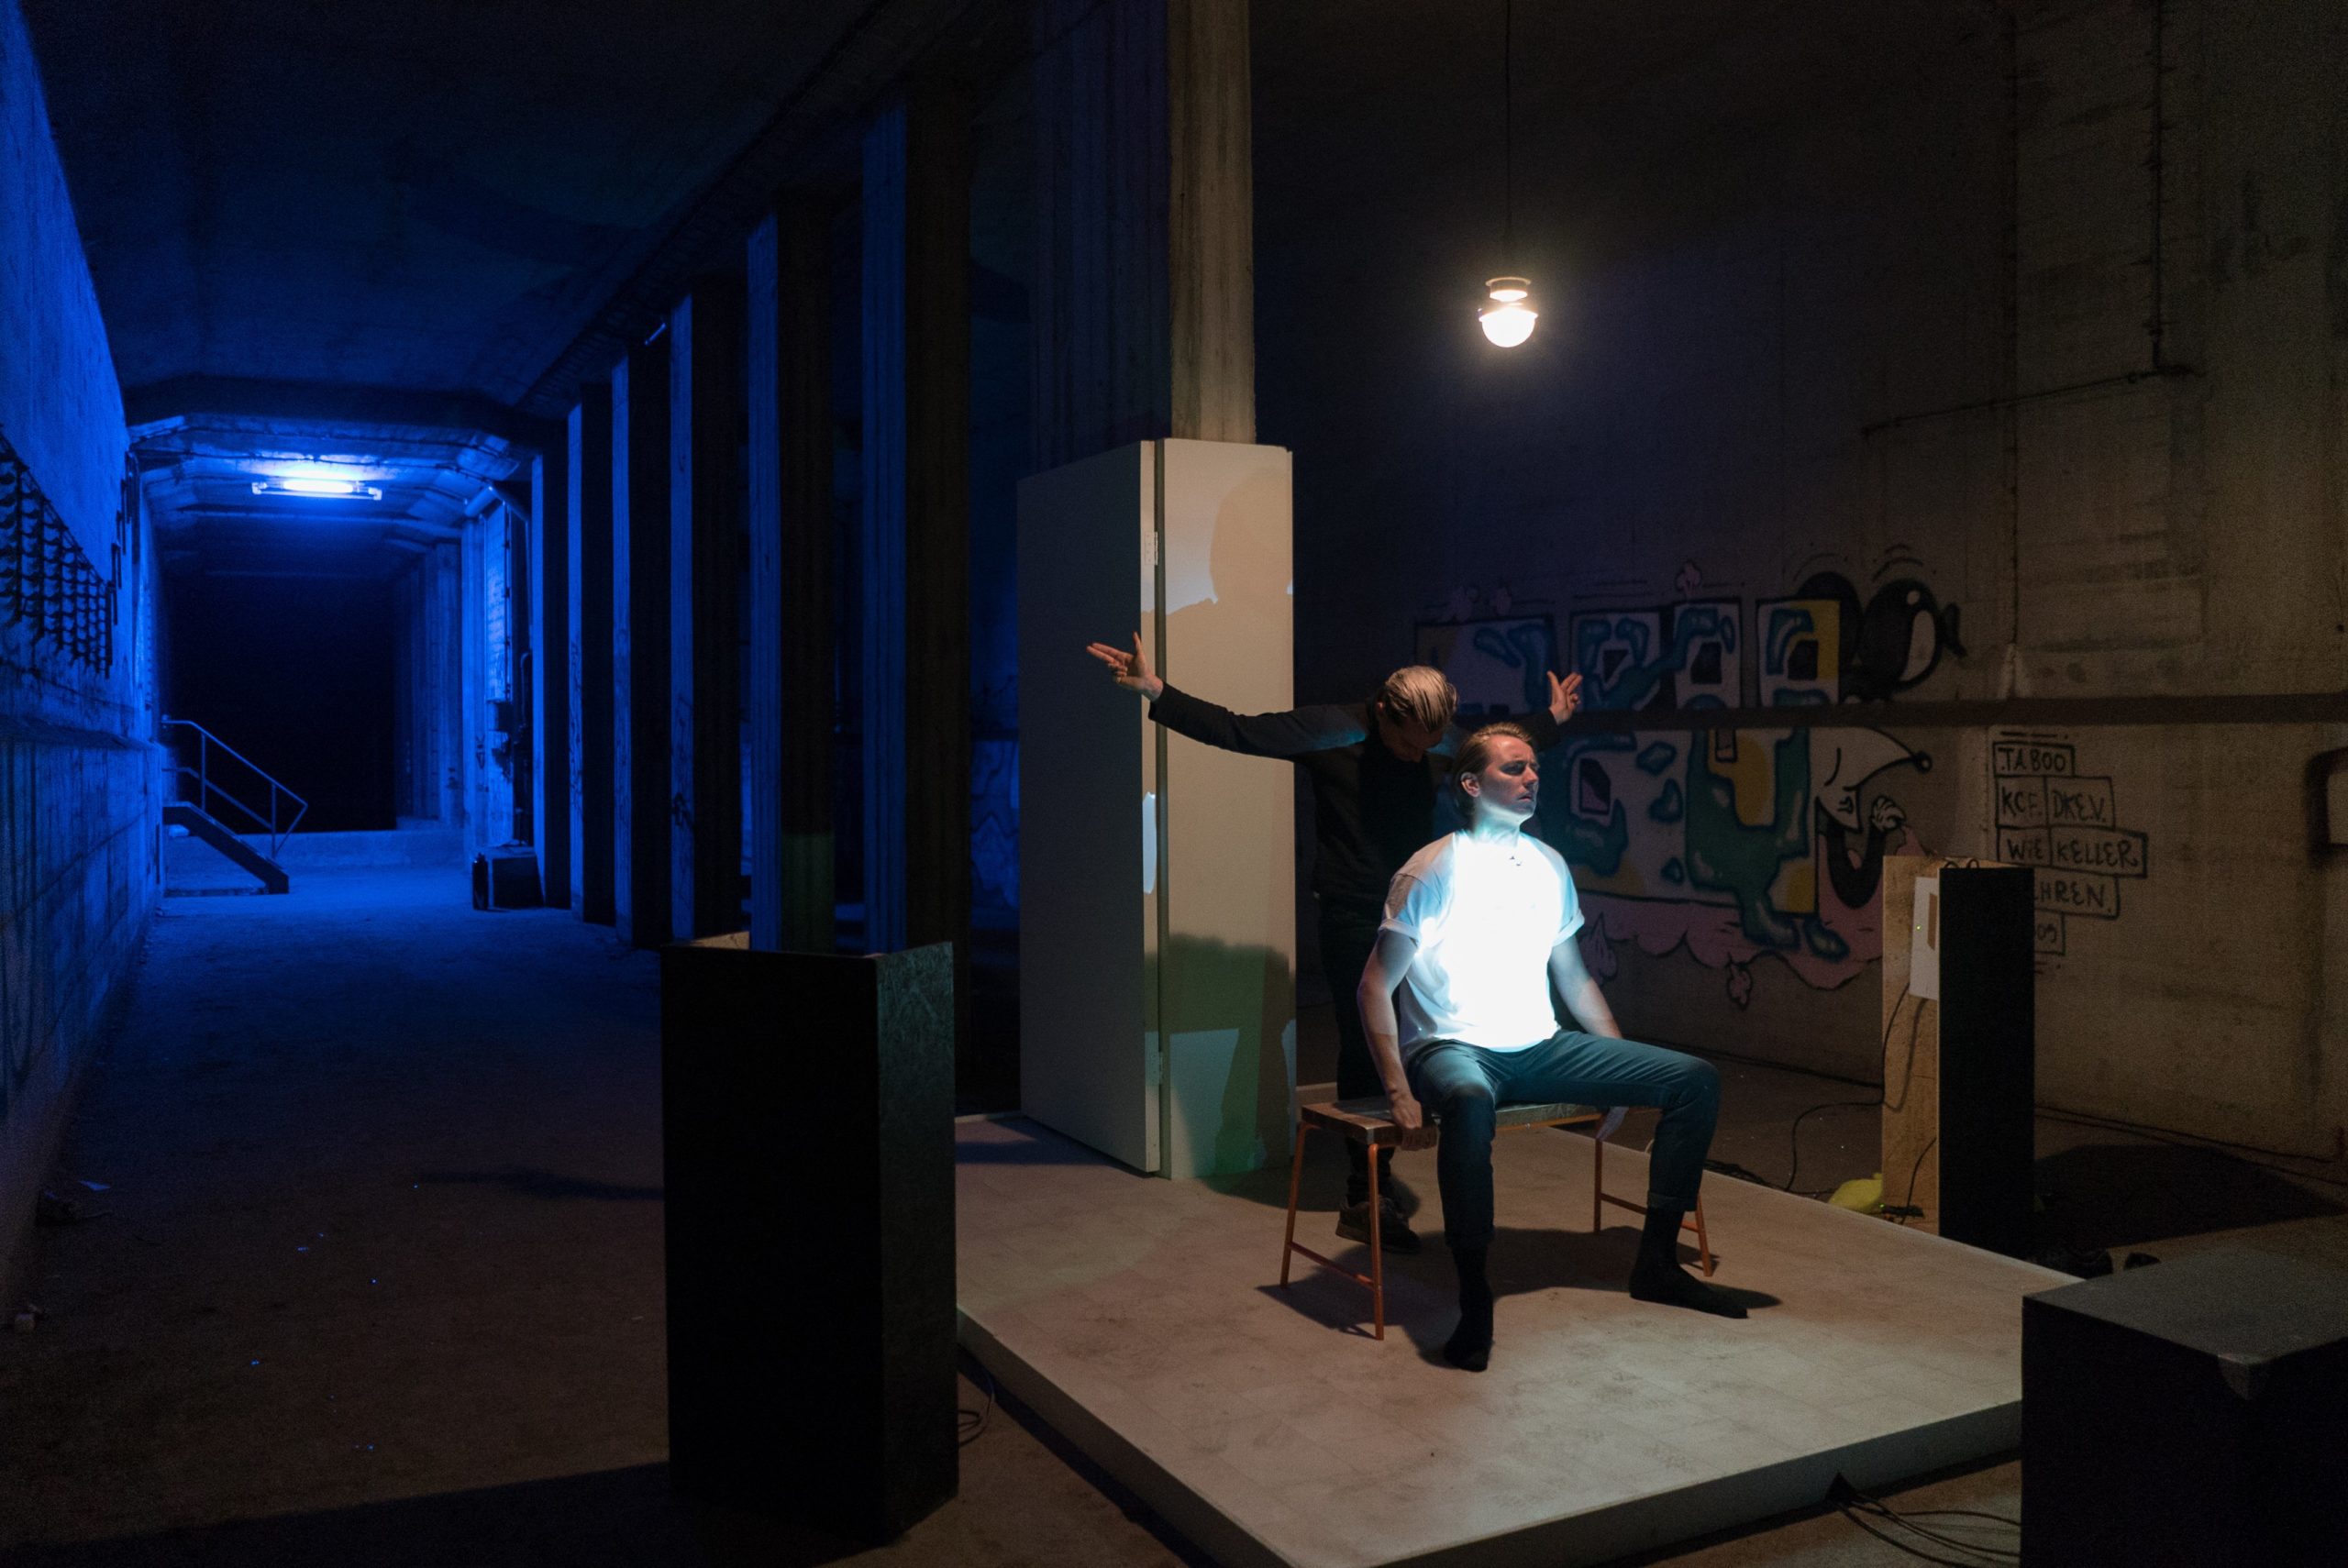 Expected film by Rocco and brothers “Blaues Licht” Light) | URBANPRESENTS